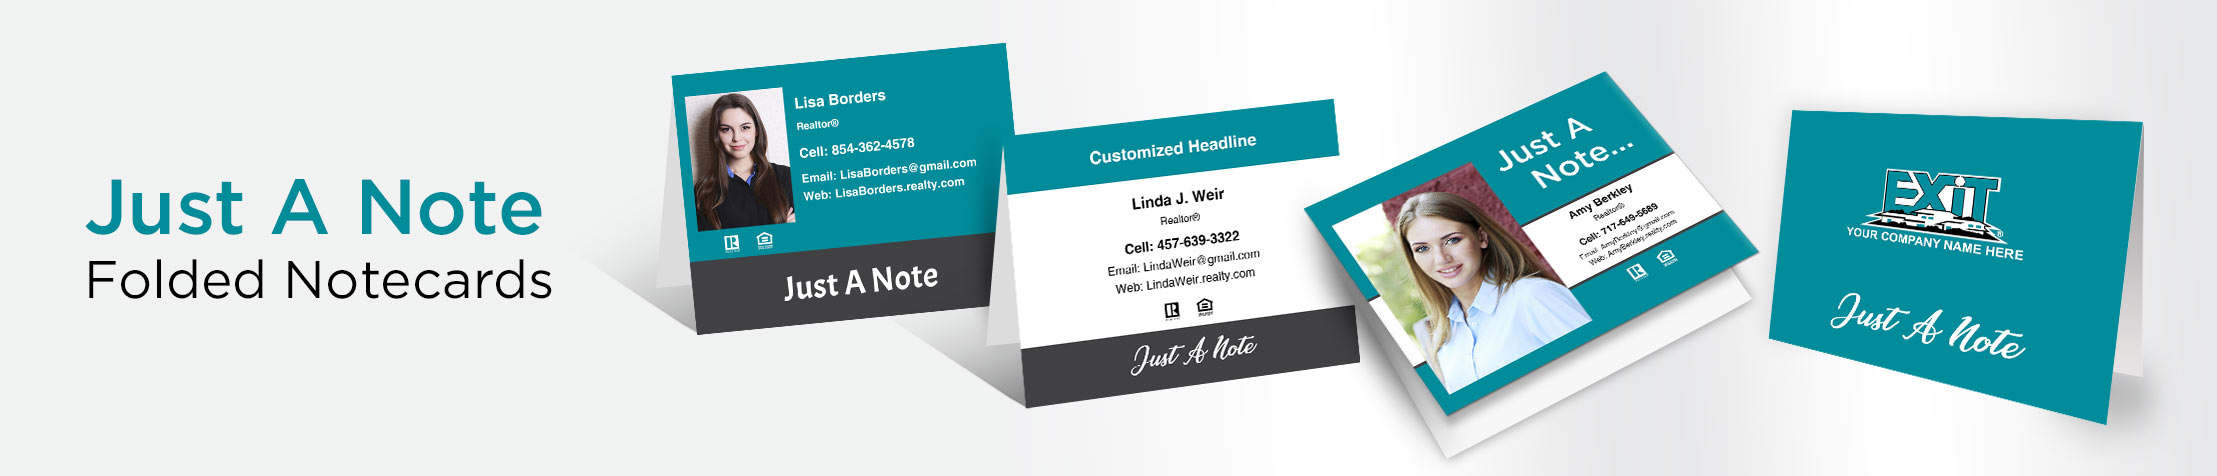 Exit Realty Just a Note Folded Note Cards - Exit Realty approved vendor note card stationery | BestPrintBuy.com